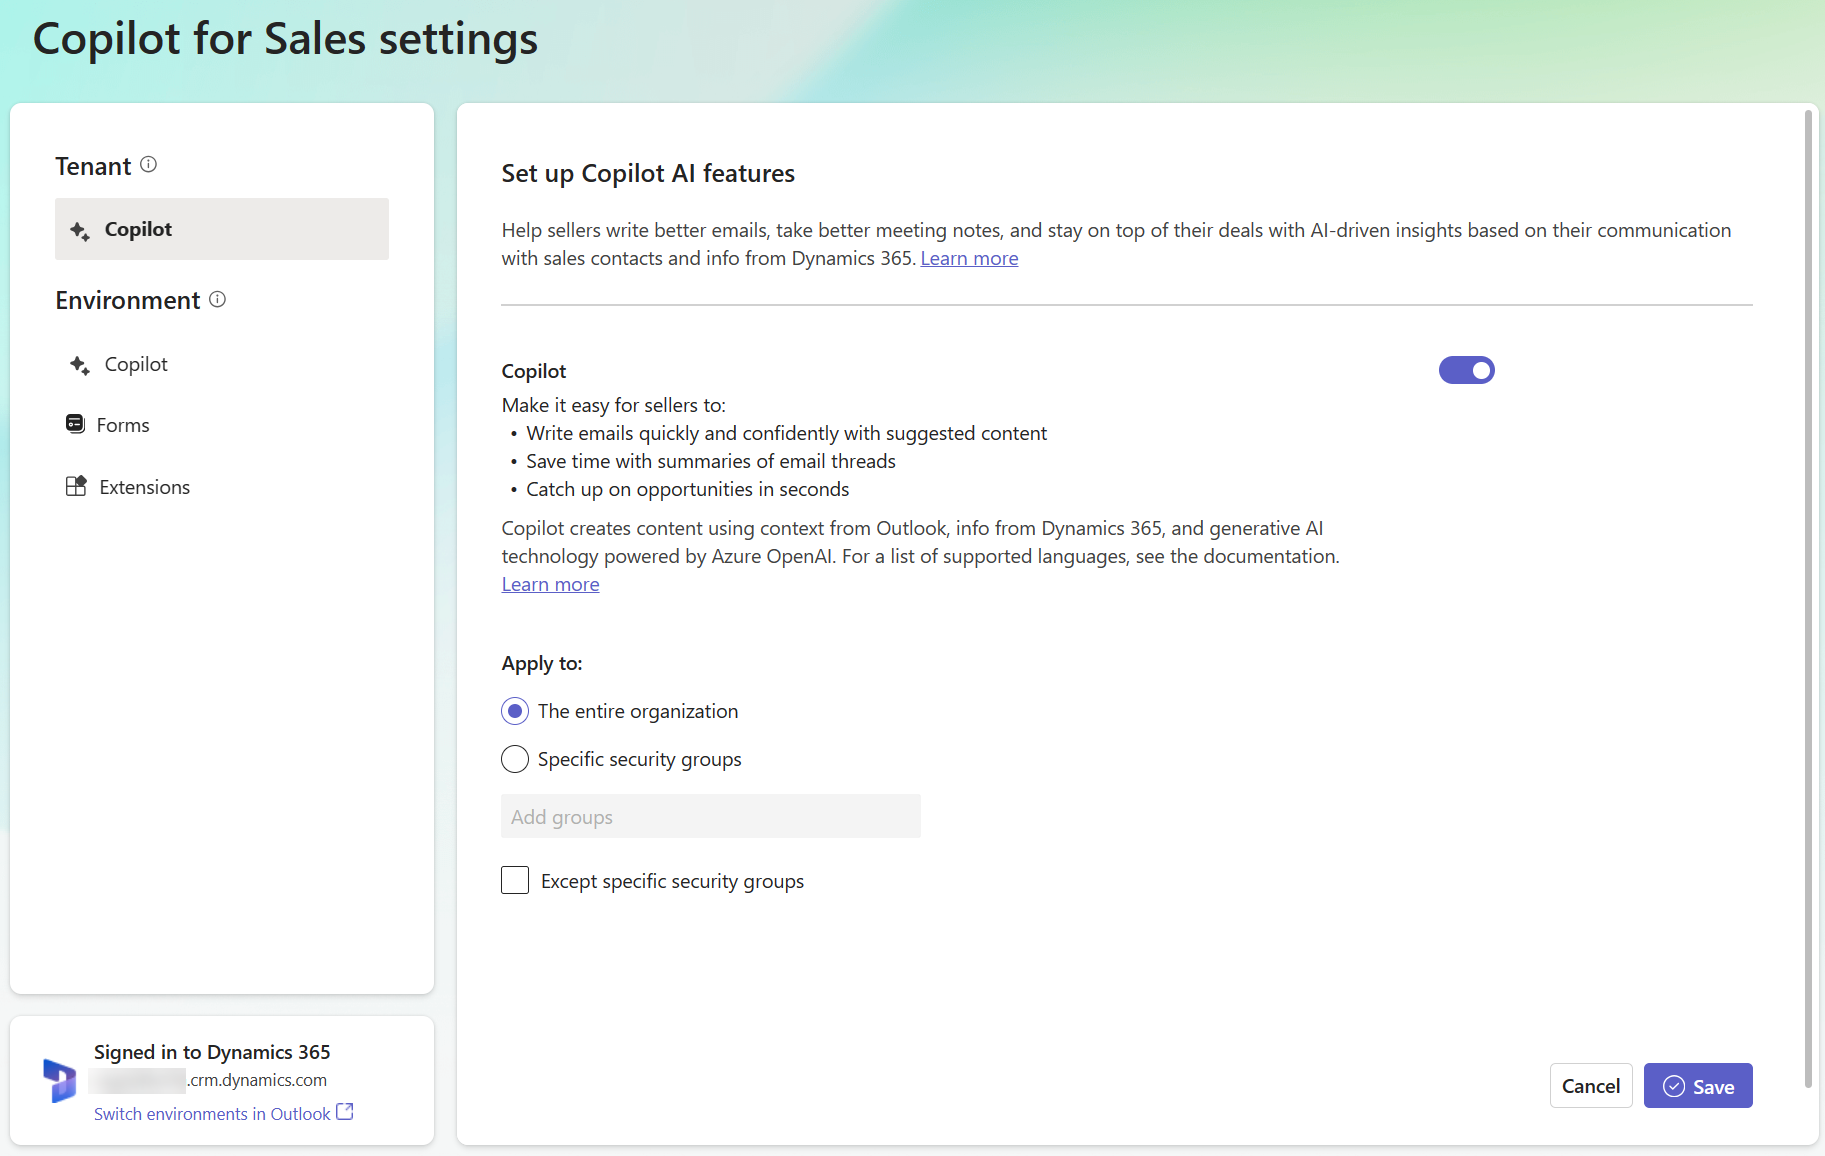 Screenshot of Copilot for Sales settings for a tenant.